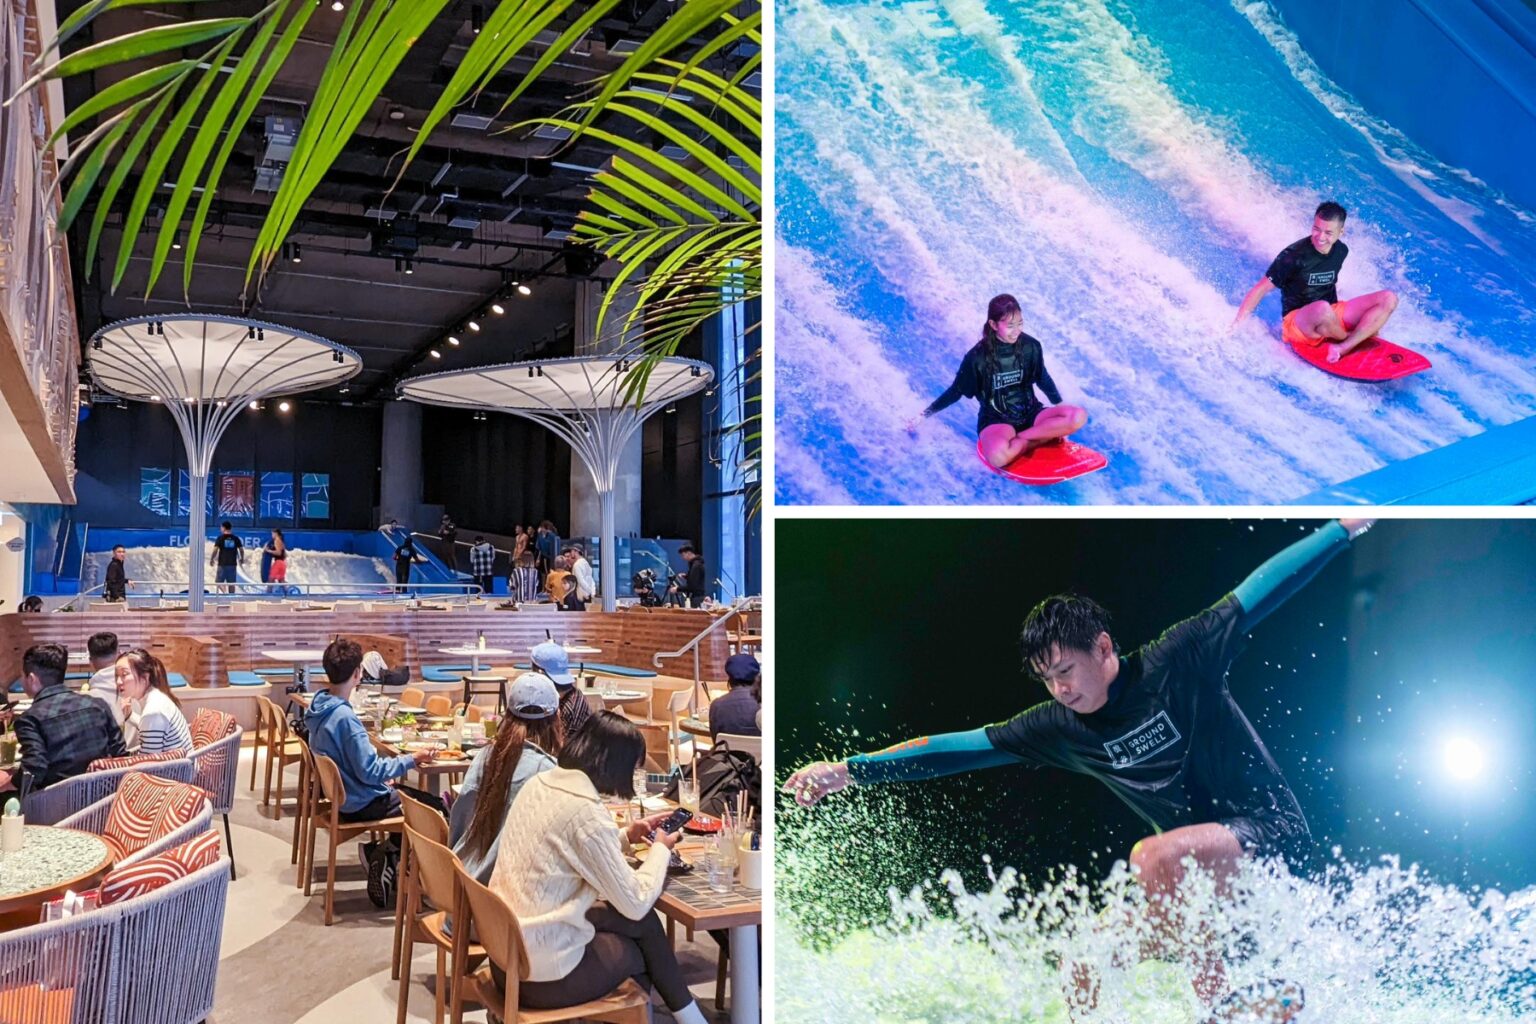 hong kong's first indoor surfing venue groundswell opens at airside mall in kai tak